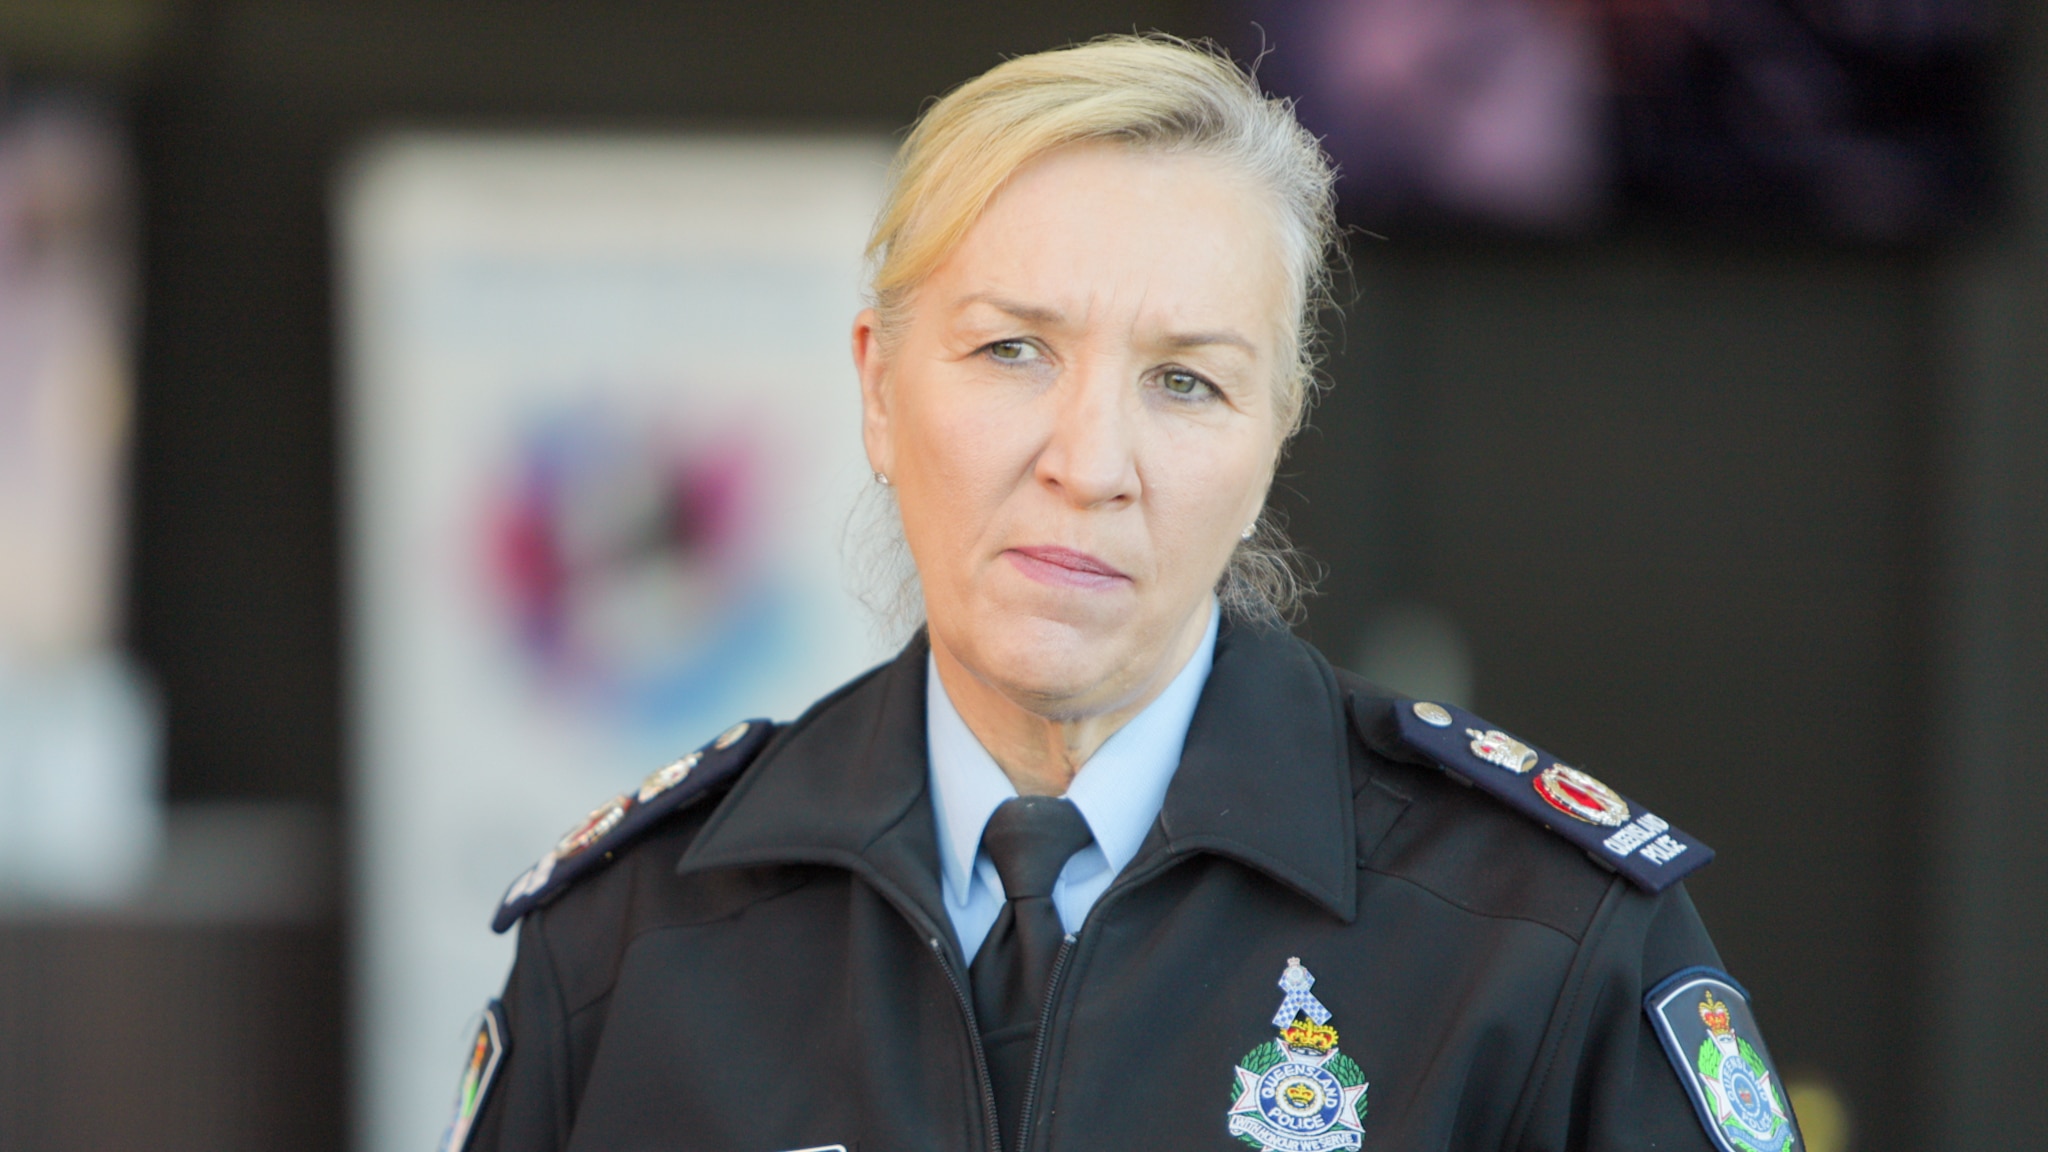 queensland police commissioner katarina carroll to step down from top job, months before contract was due to end